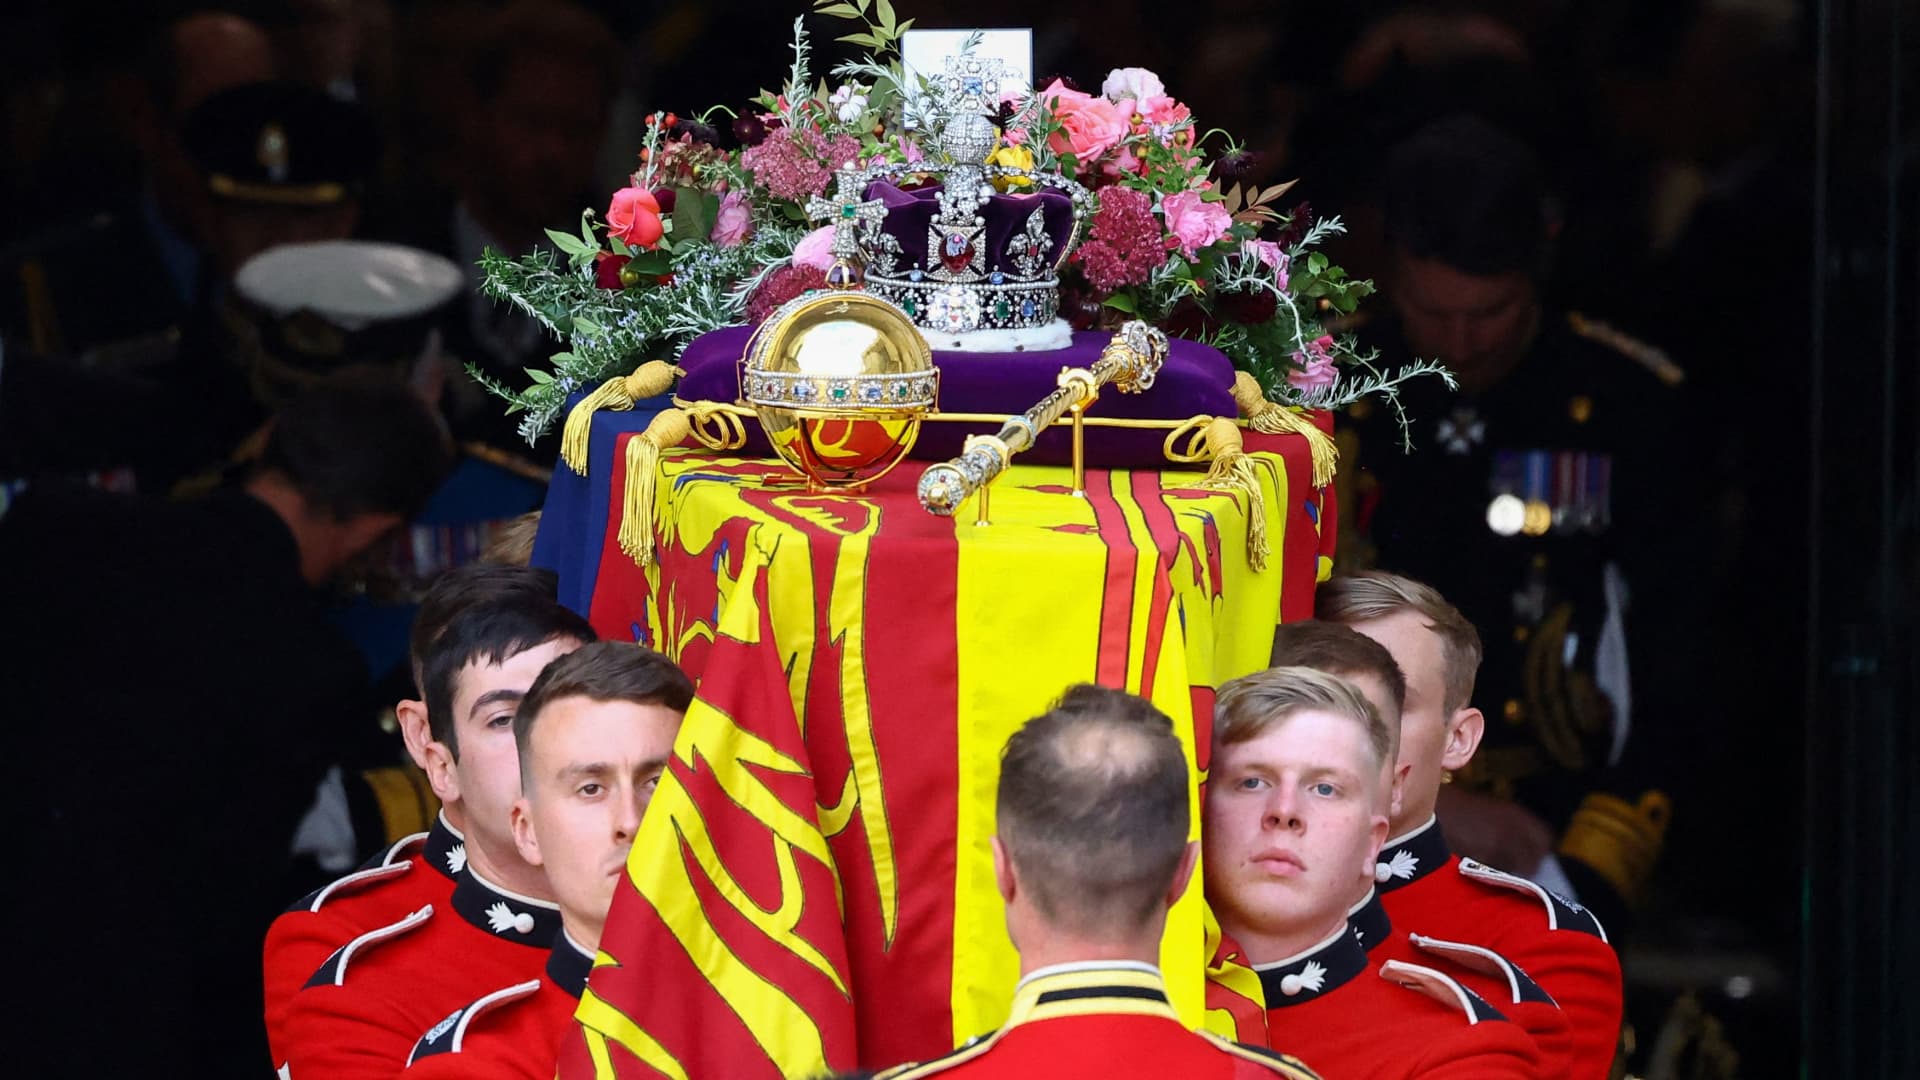 Photos show a nation in mourning as Queen Elizabeth II is laid to rest